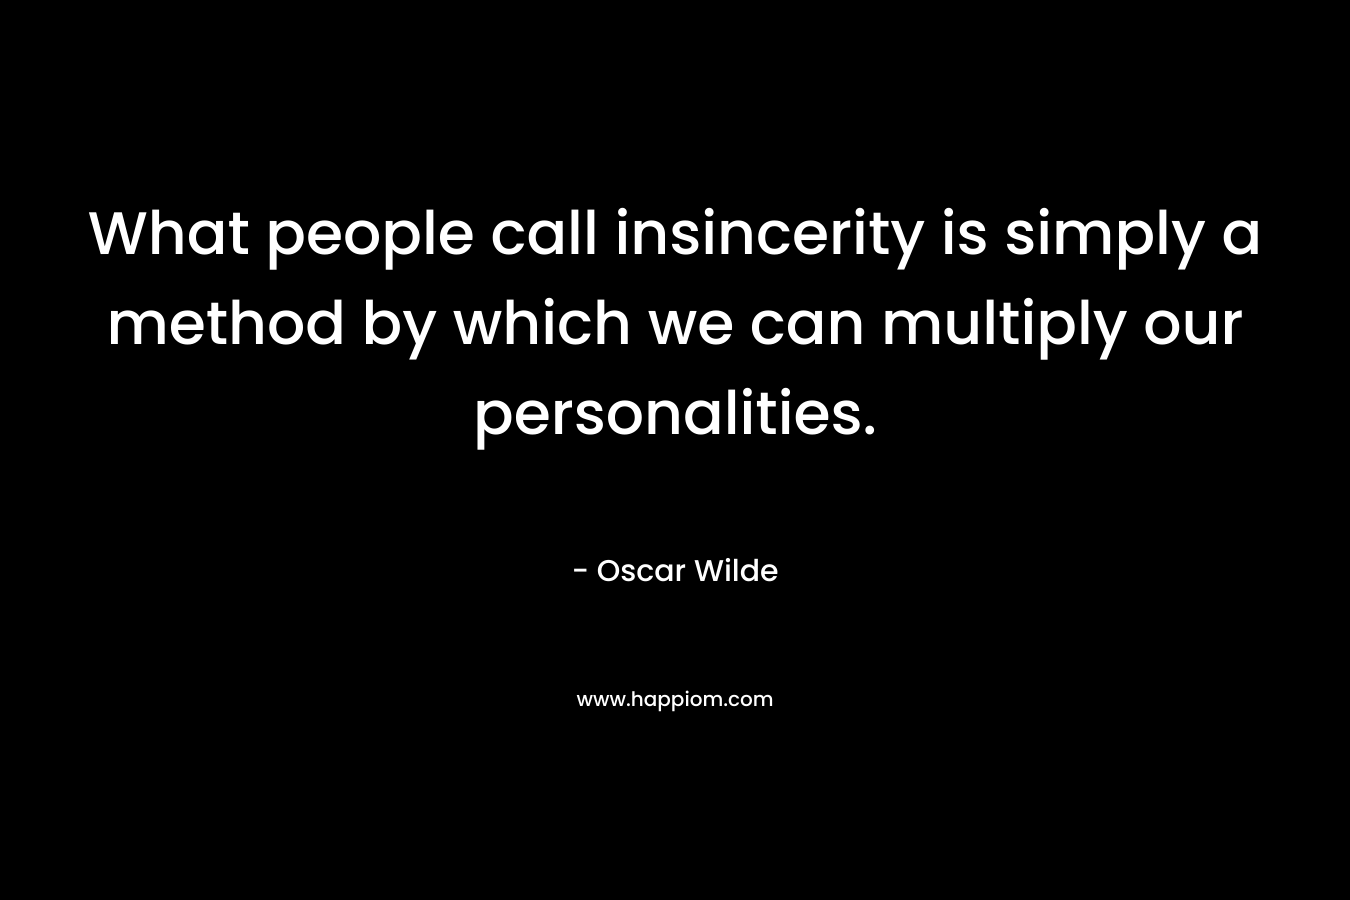 What people call insincerity is simply a method by which we can multiply our personalities. – Oscar Wilde